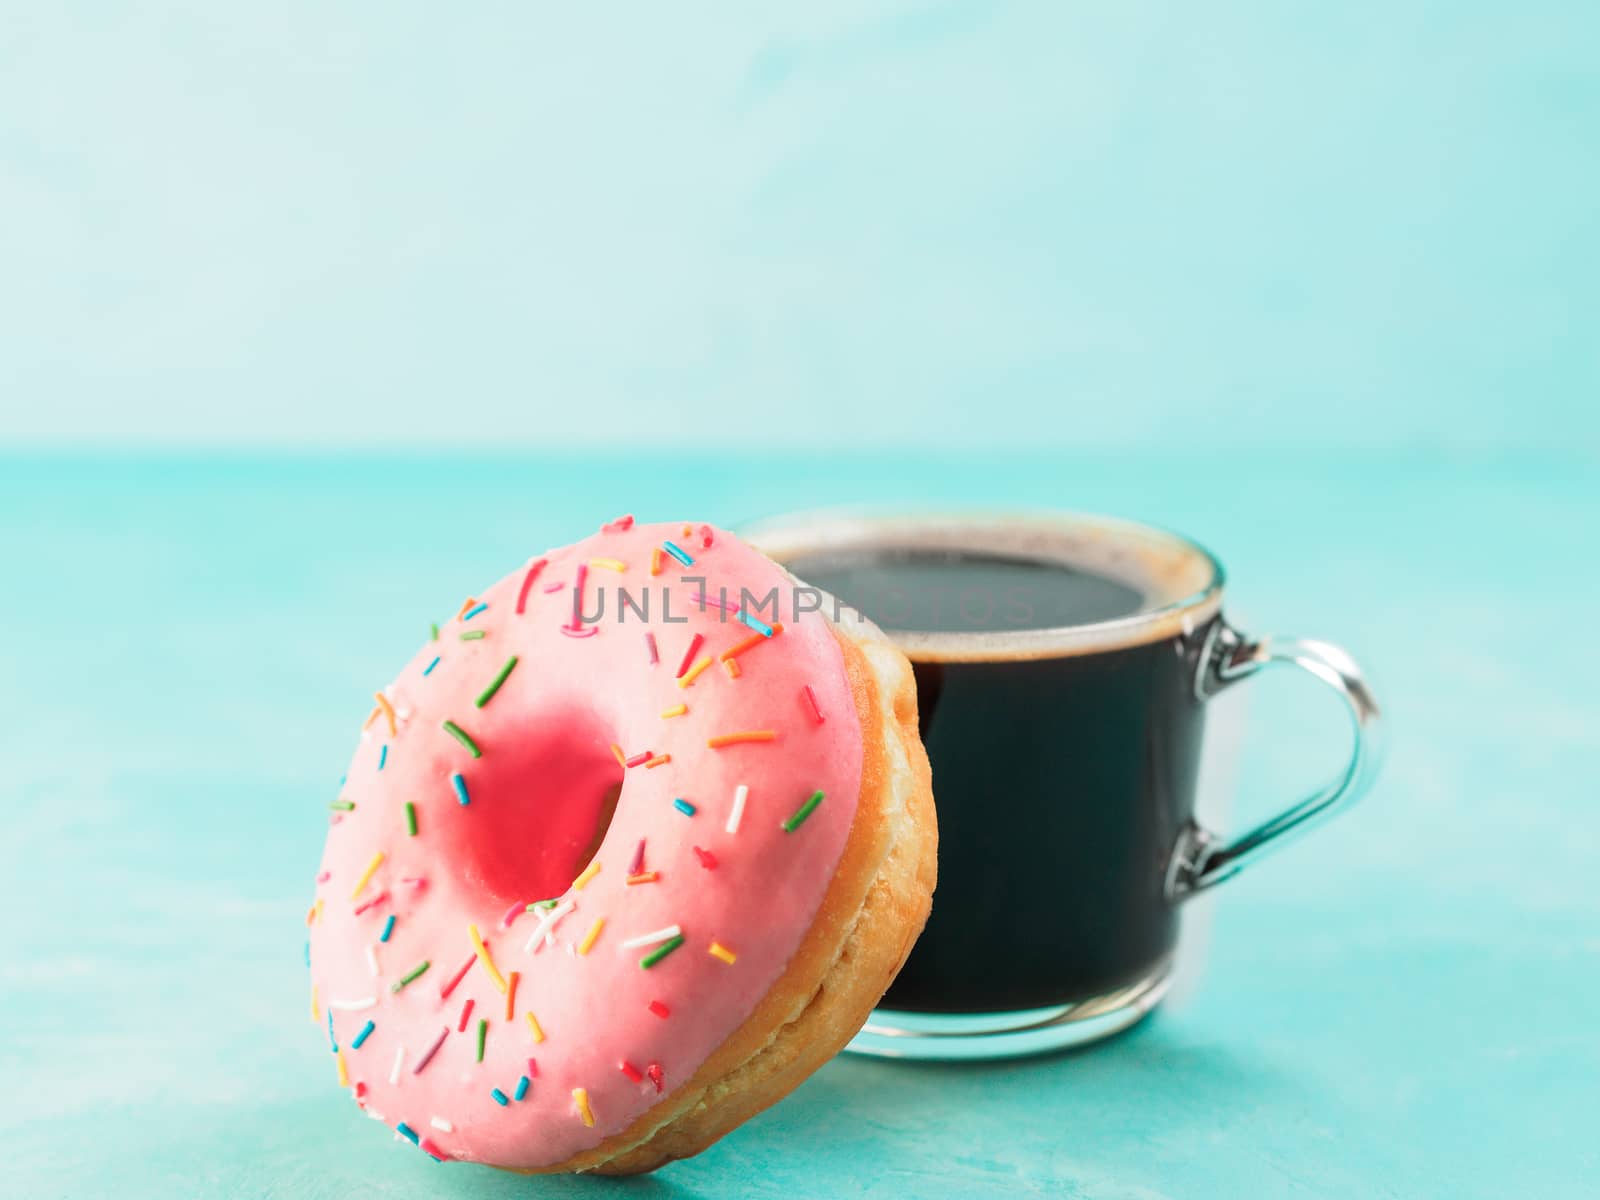 Pink donut and coffee on blue concrete background with copy space. Glazed doughnut and coffee cup with copyspace